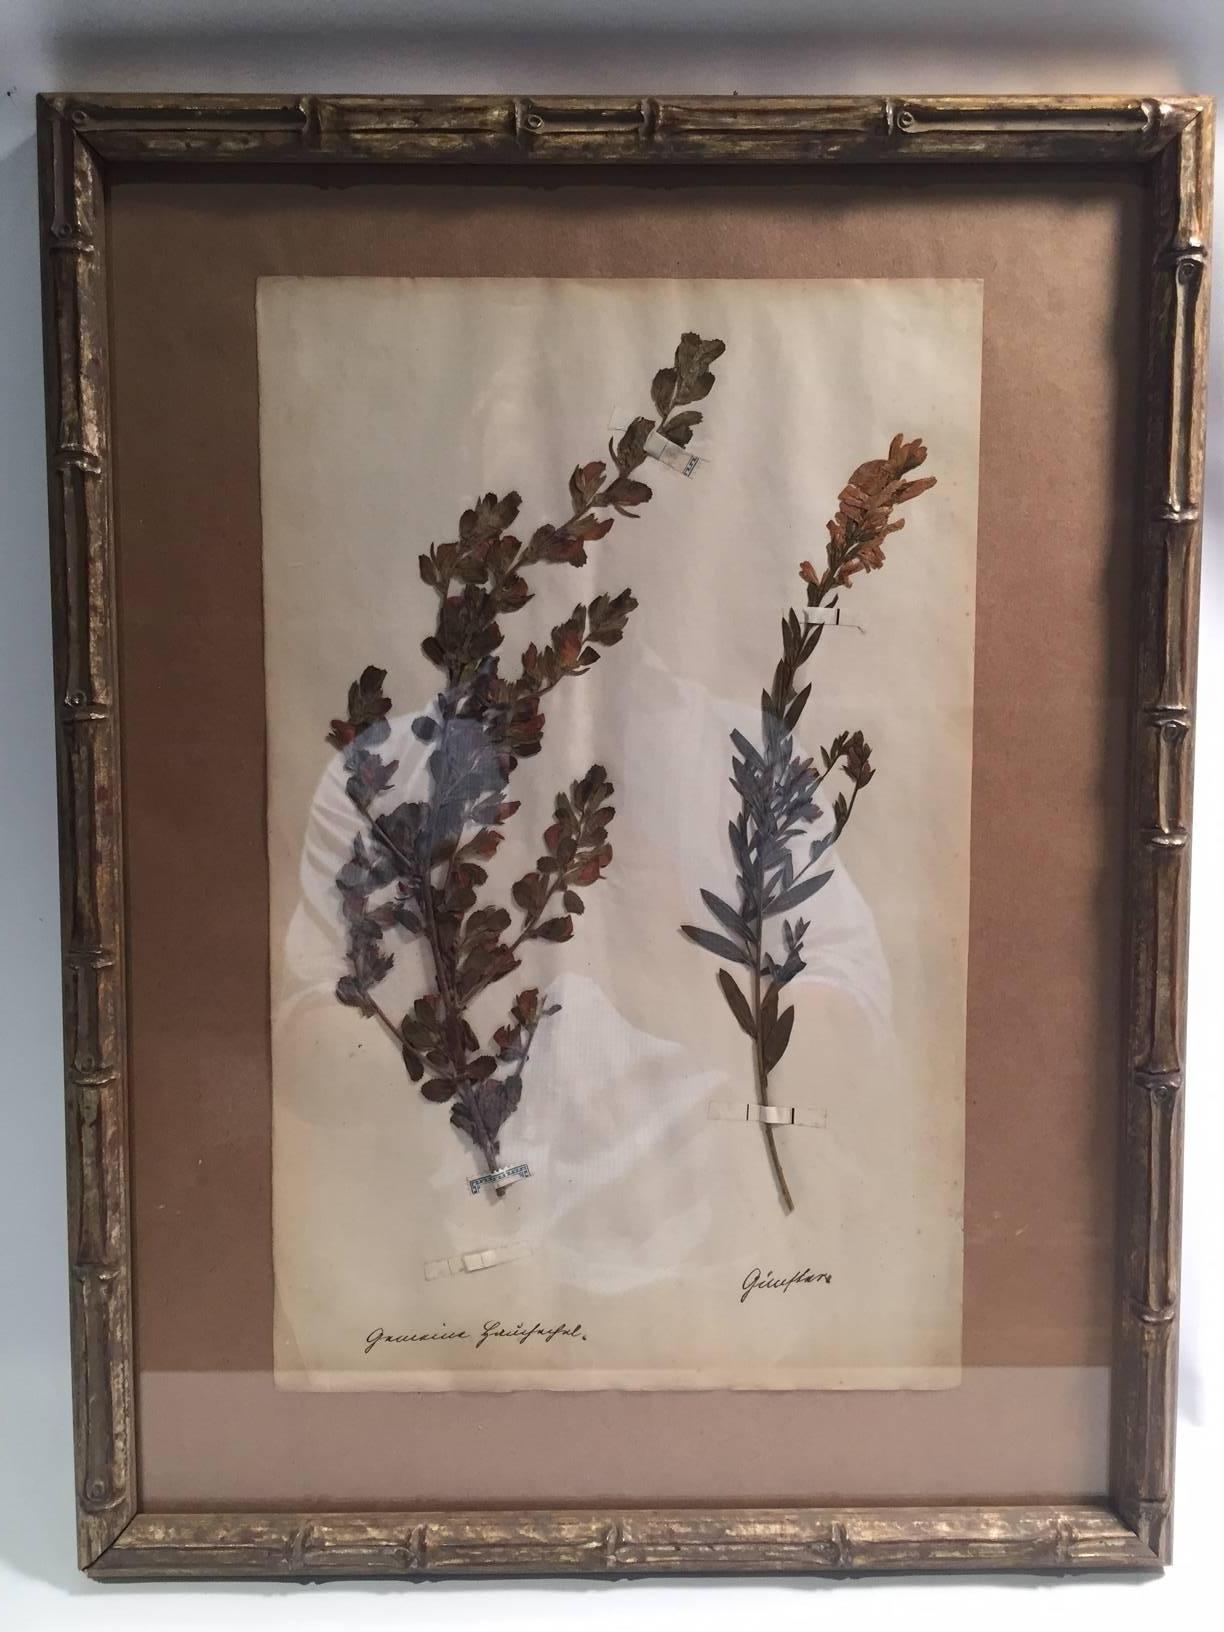 Six Late 19th century framed and pressed herbier from a French collection. Herbier specimens were collected and pressed from plants found around the world. In the late 19th century collecting herbier was a popular pastime for affluent Europeans;